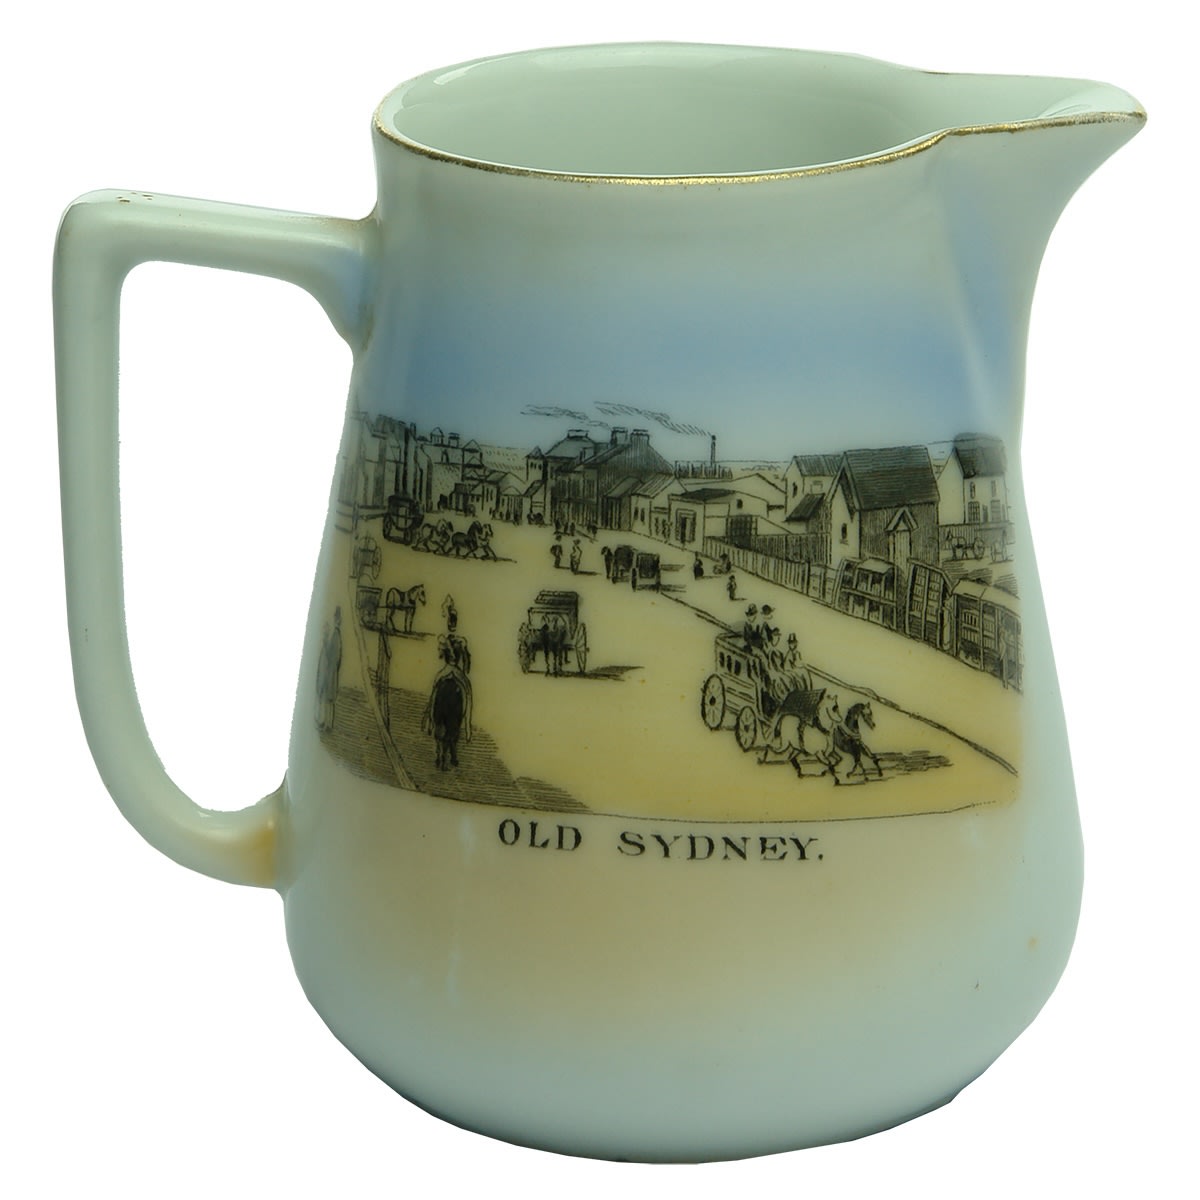 Souvenirware. Old Sydney one side and Sydney today the other, Royal Scenic China, Czechoslovakia. Small cream jug. (Victoria)